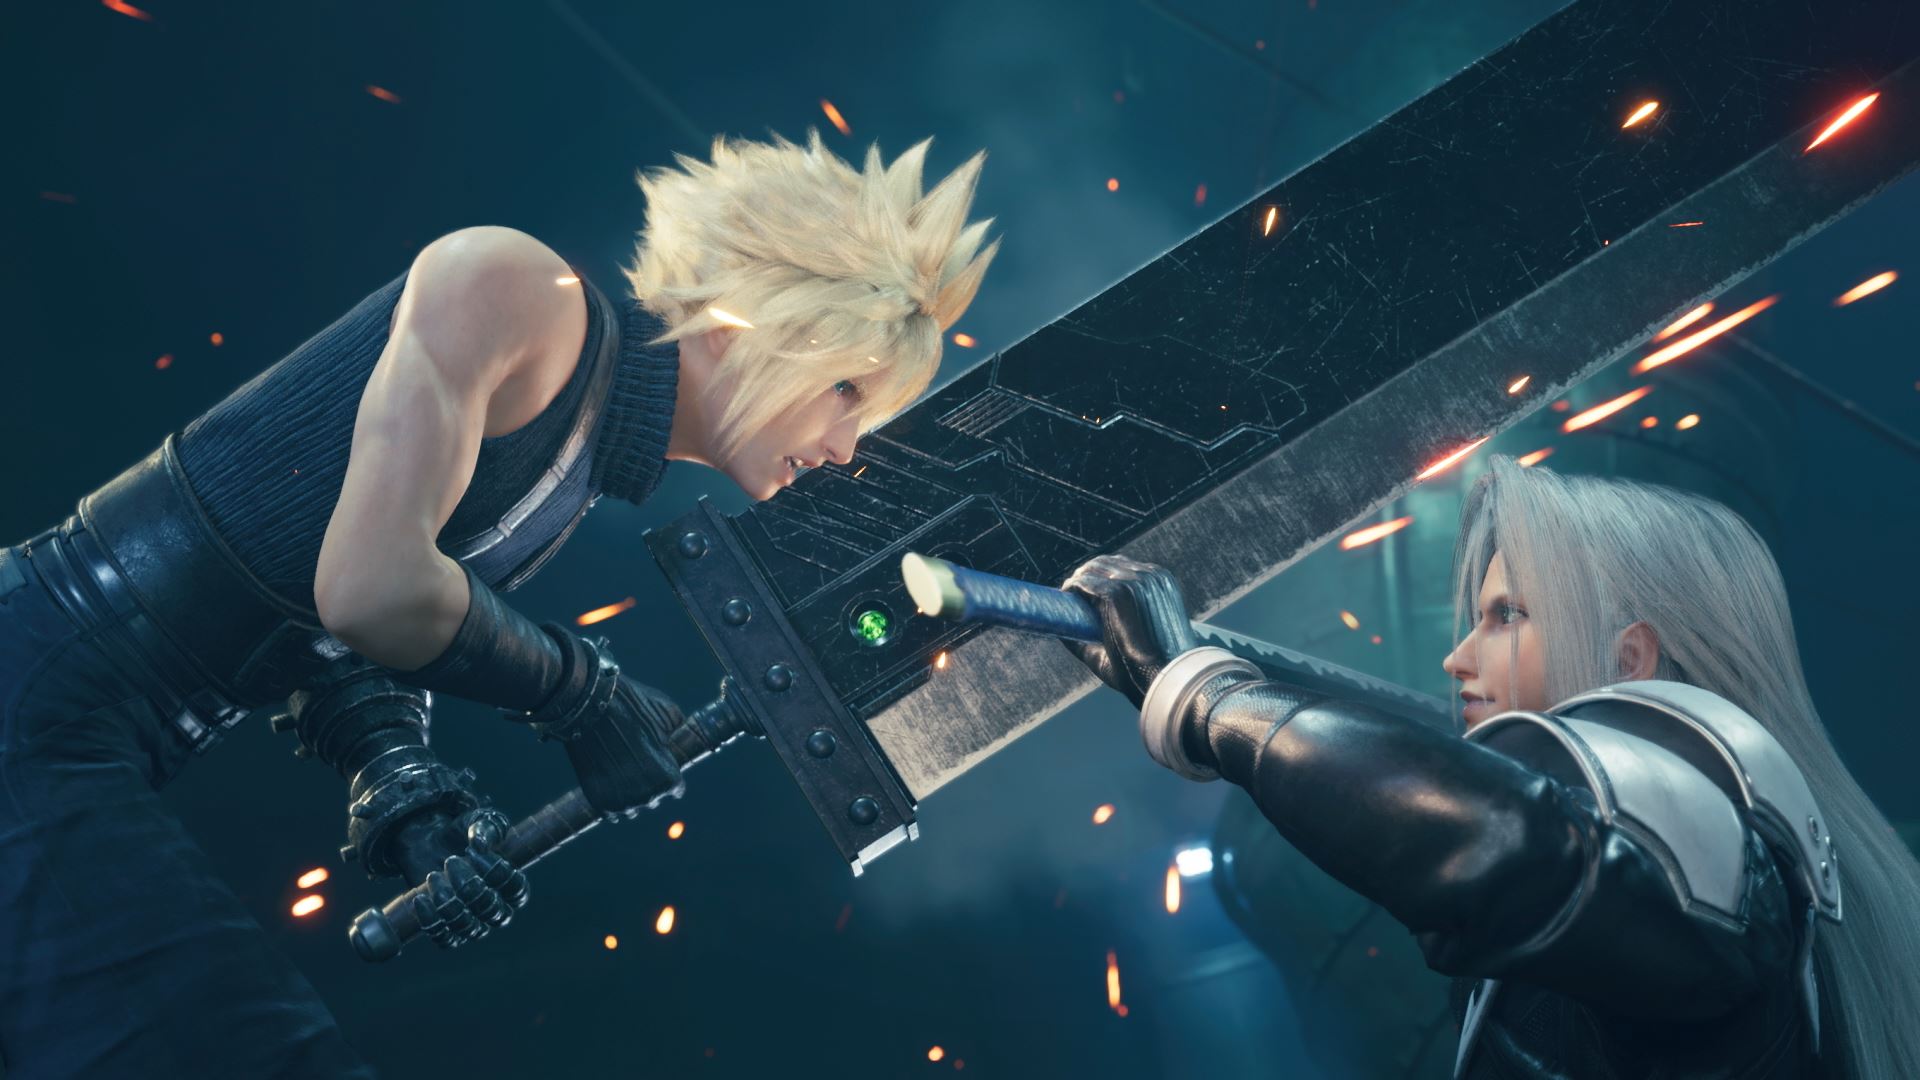 Final Fantasy 7 Remake Part 2 Release Date: PS4, PS5, Xbox, PC